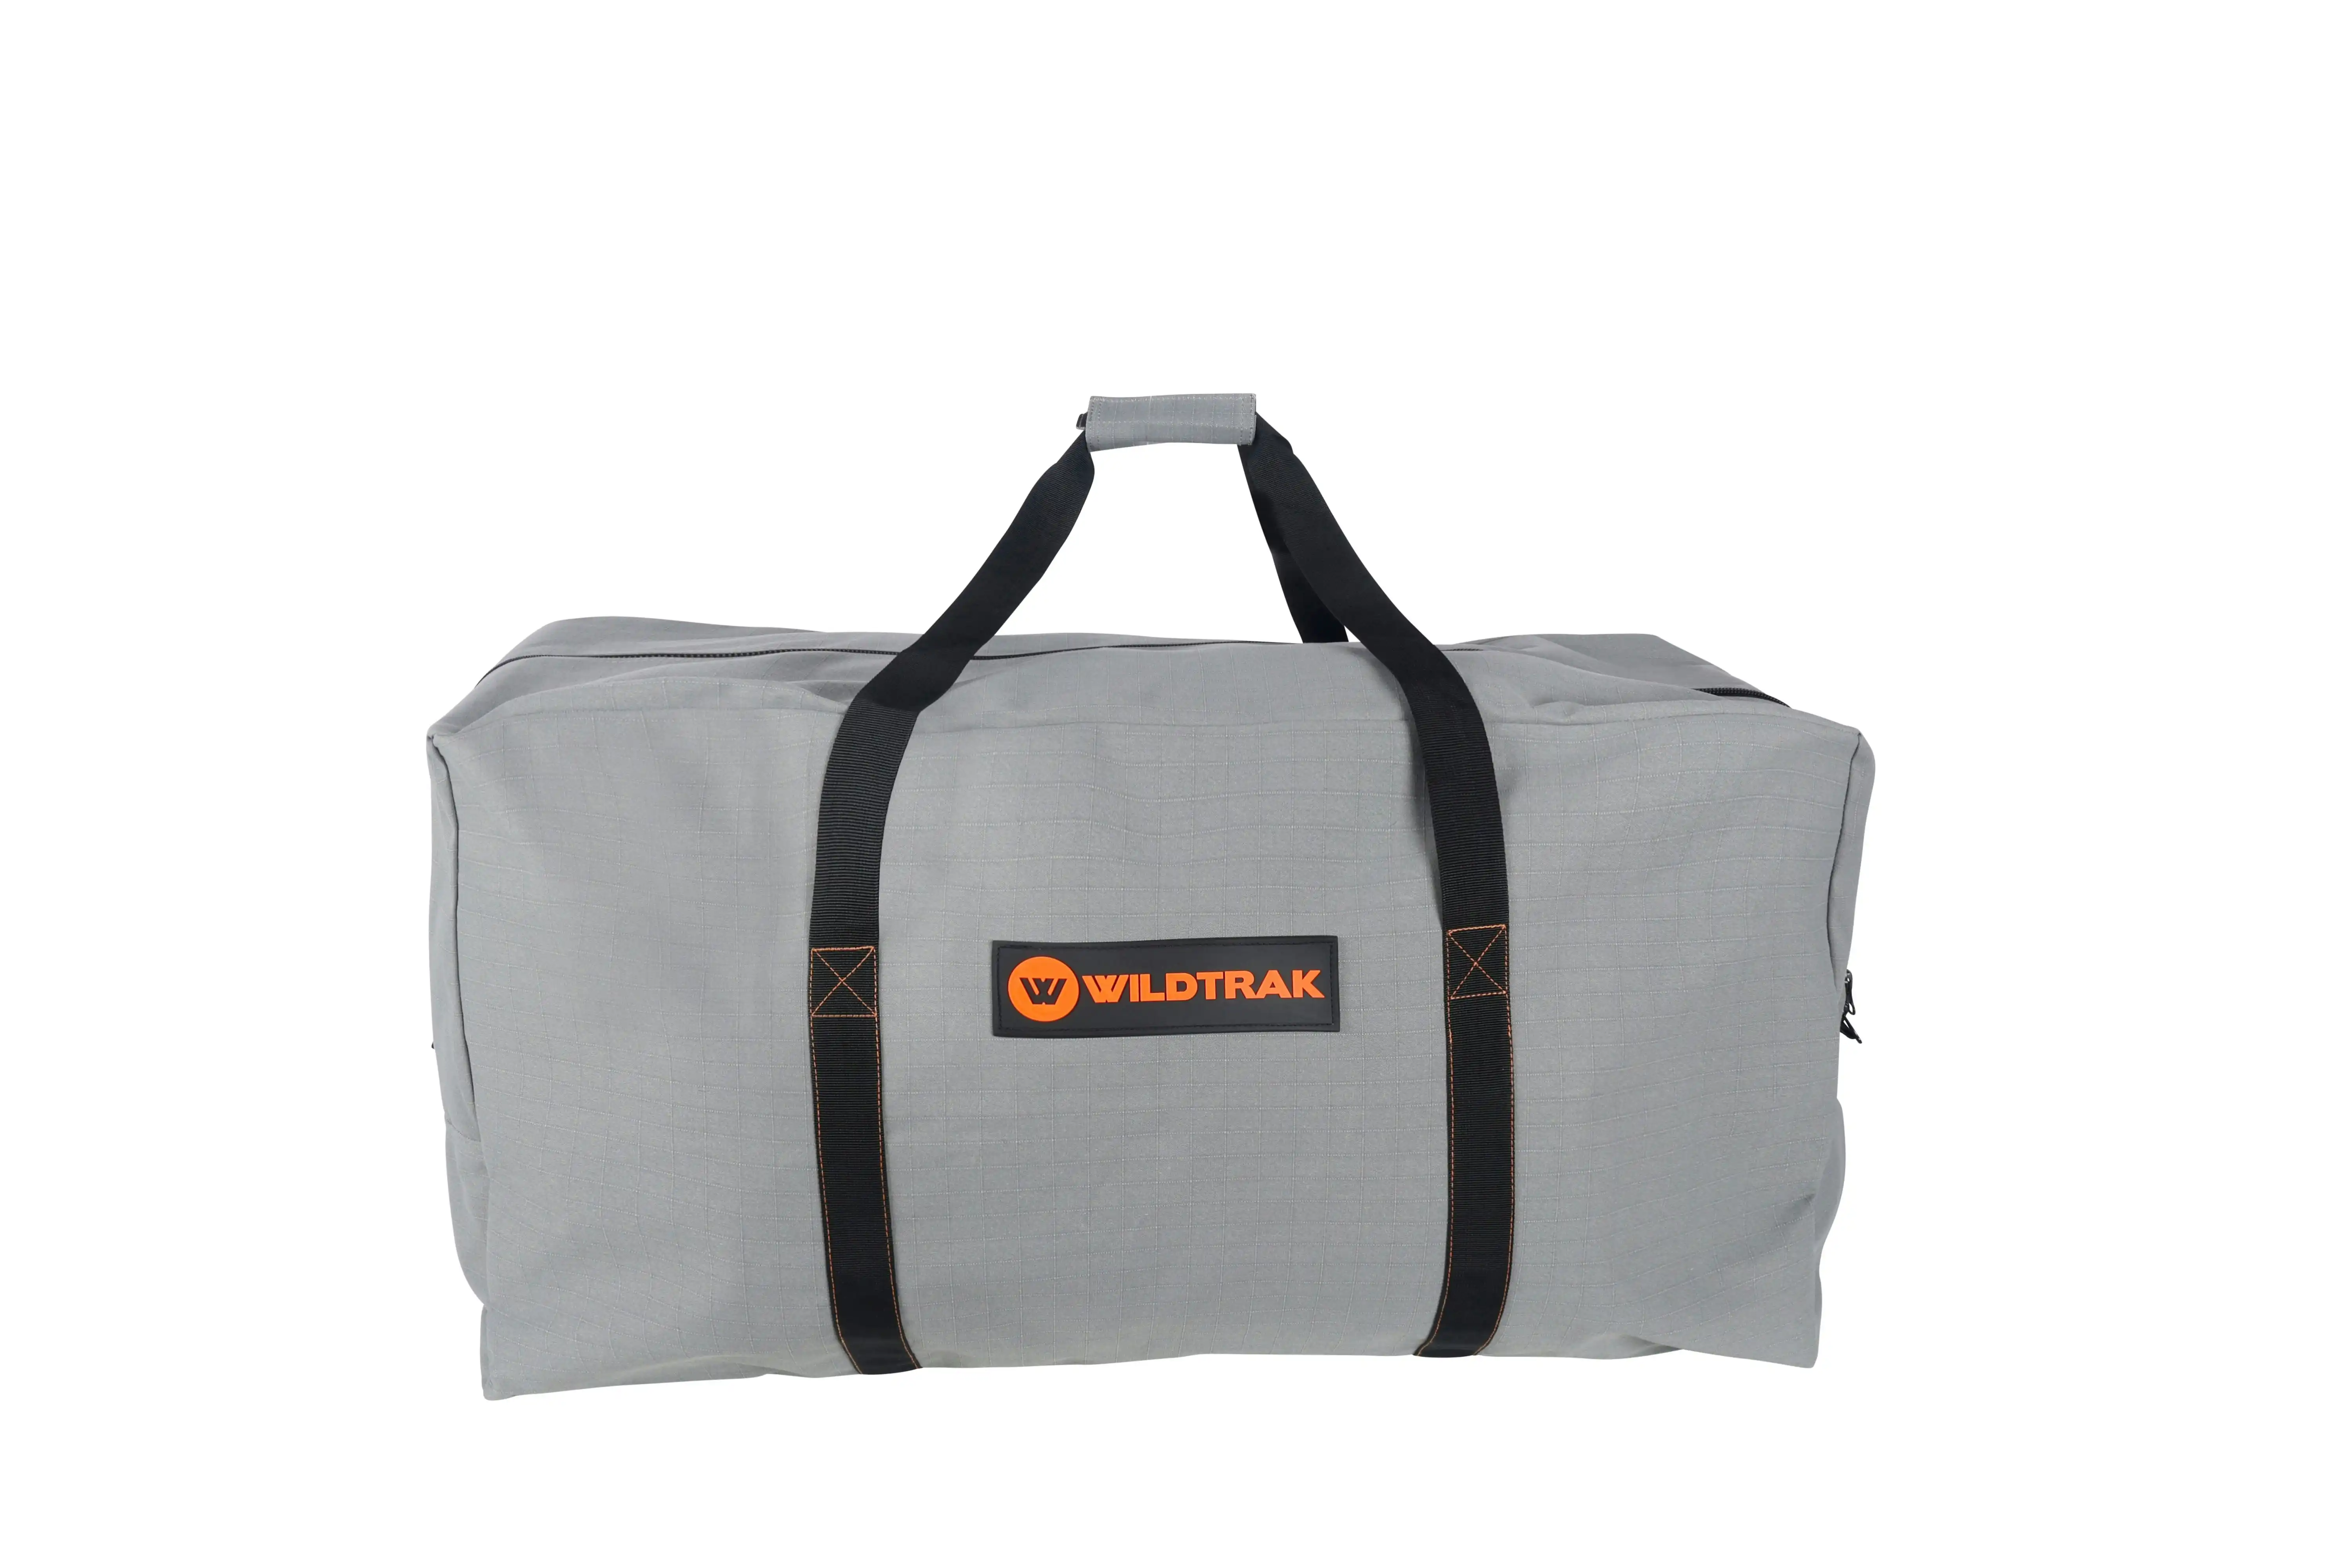 Large Canvas Duffle Bag   400gsm Ripstop Canvas